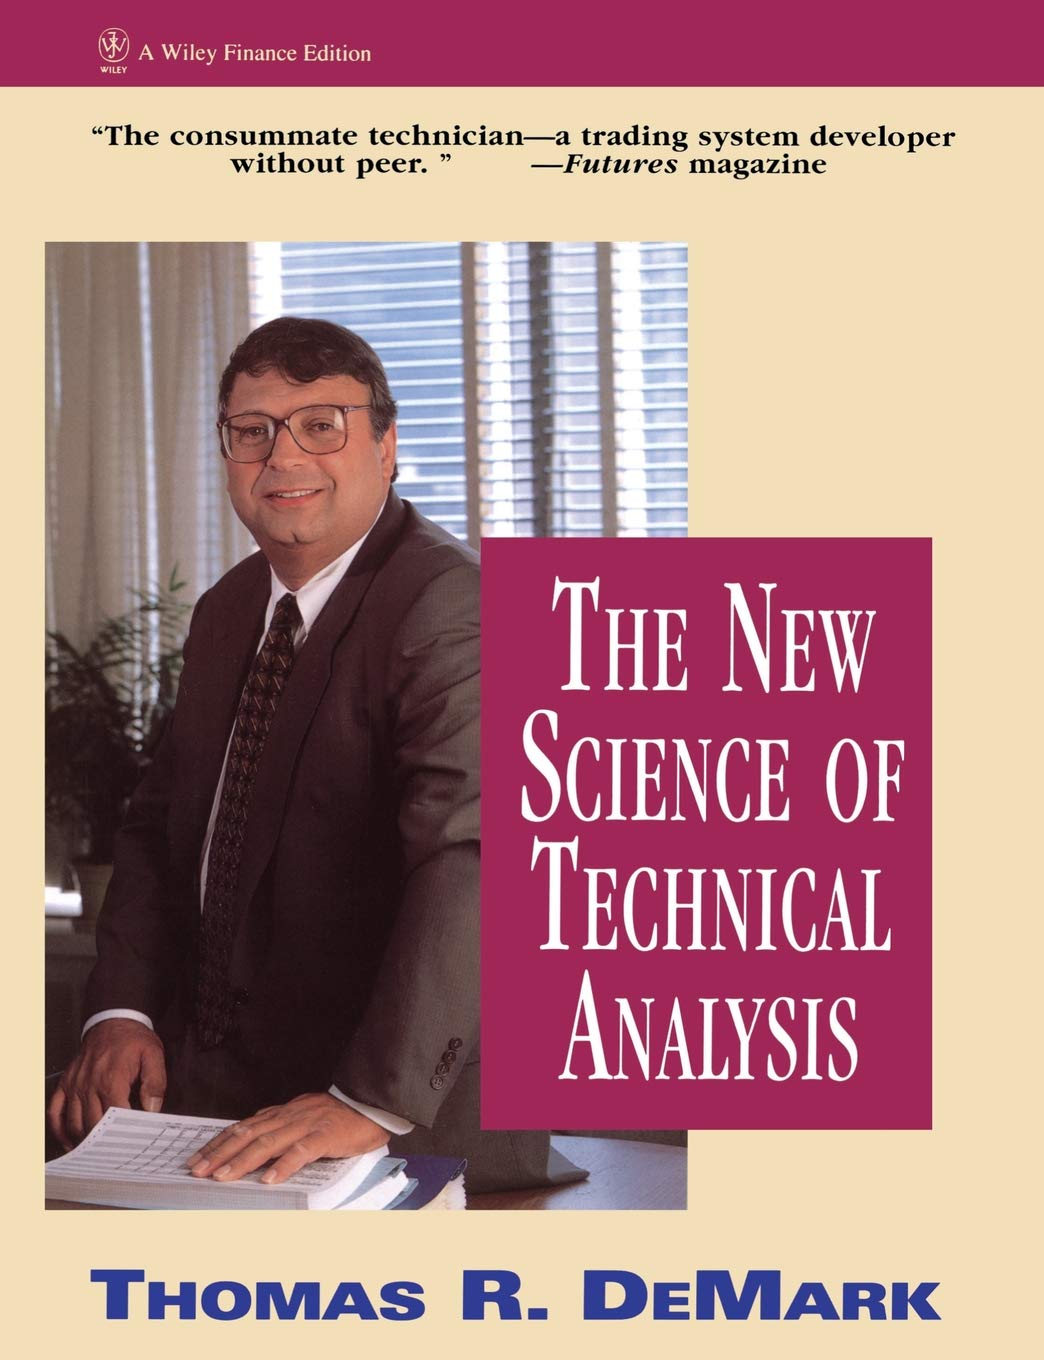 [Thomas R. DeMark] The New Science of Technical Analysis